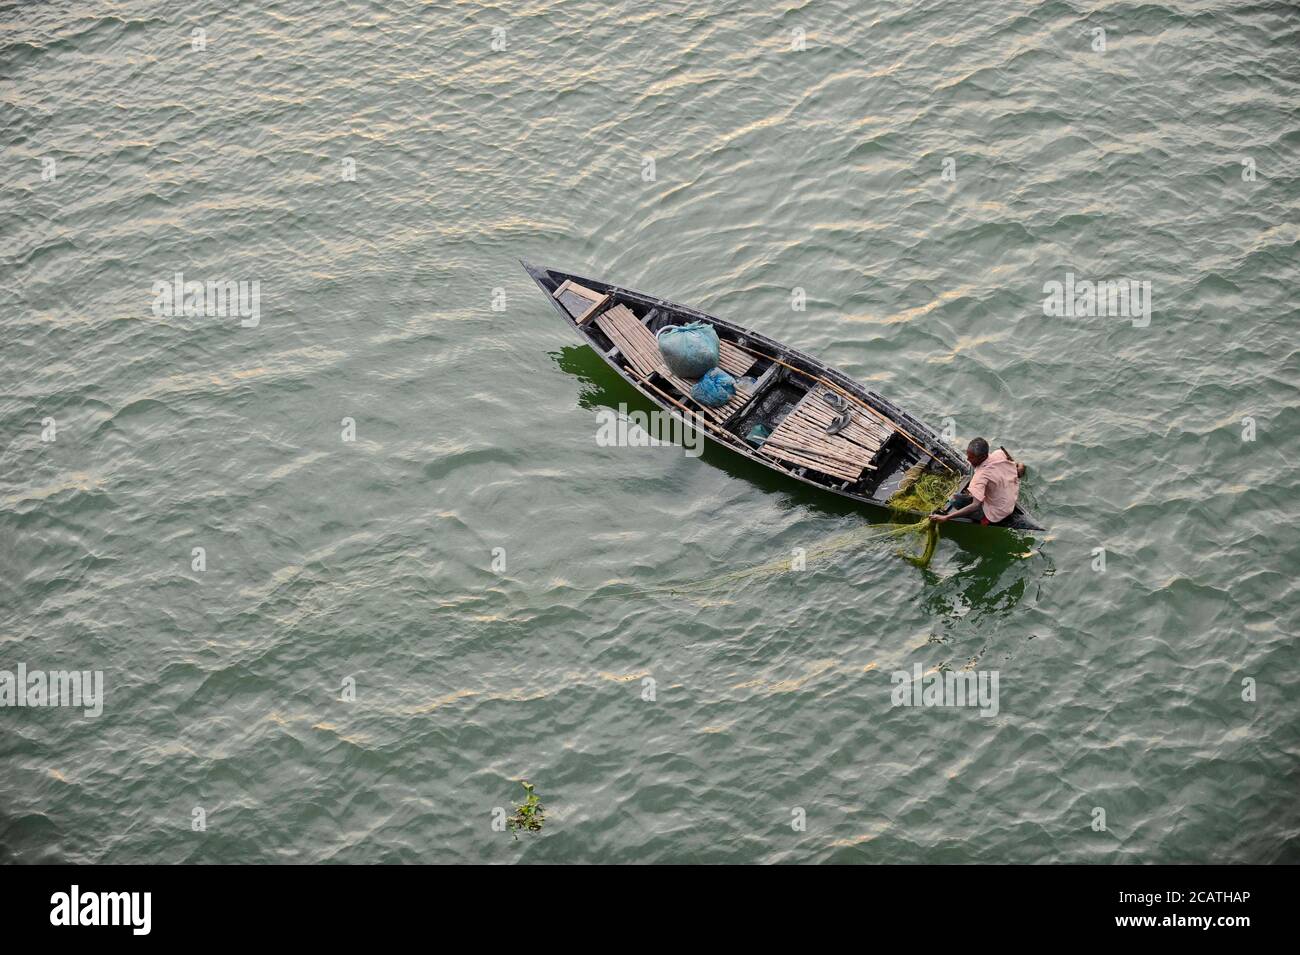 A fisherman seen trying to catch some fish. In the delta of rivers Ganga (Padma), Brahmaputra and Meghna people live on the water. Stock Photo